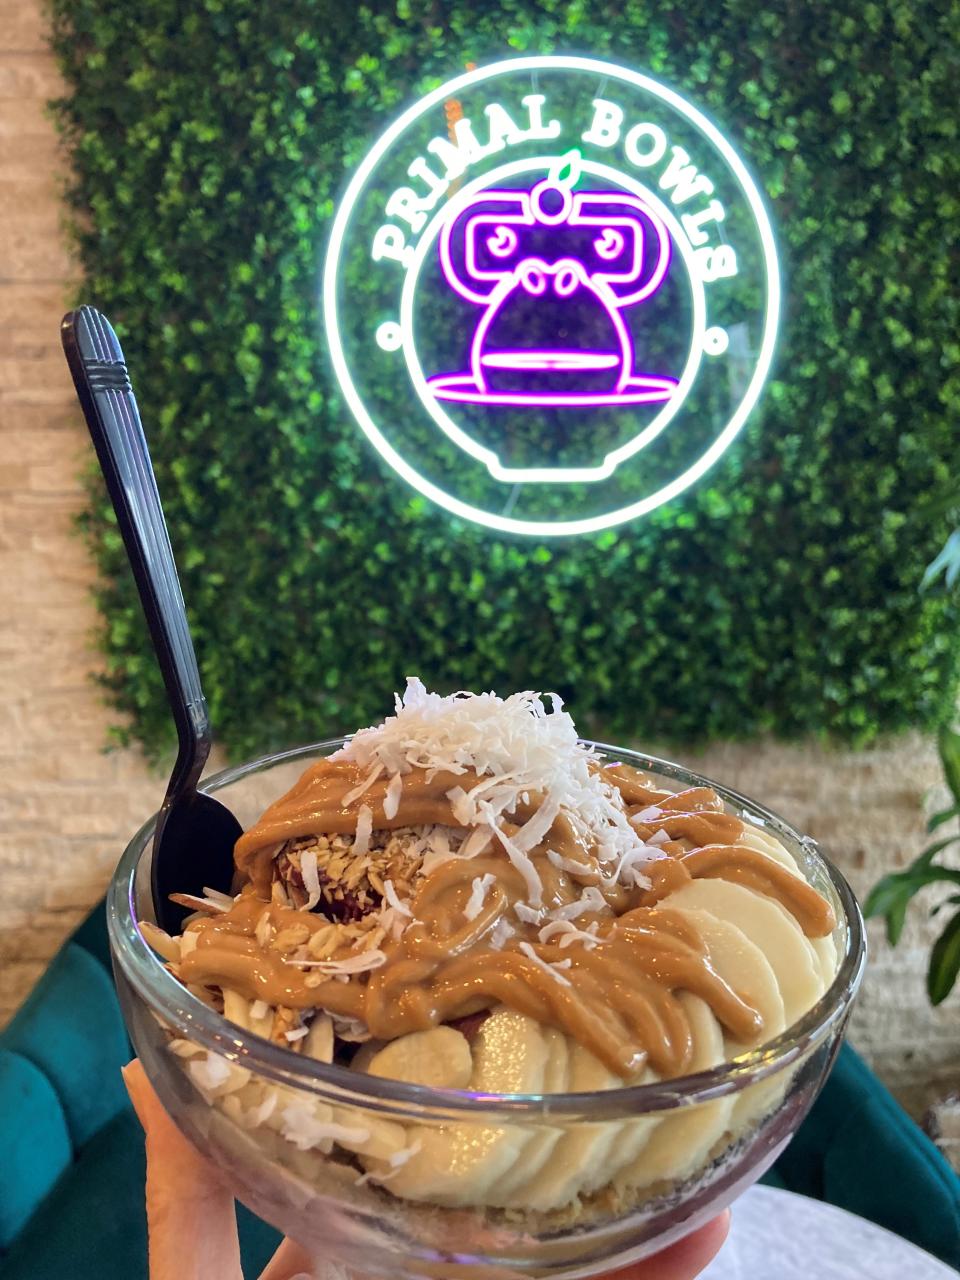 The "Funky Monkey" acai bowls at Primal Bowls in Yorktown Heights, made with banana, peanut butter, granola and coconut flakes. Photographed Nov. 29, 2021.